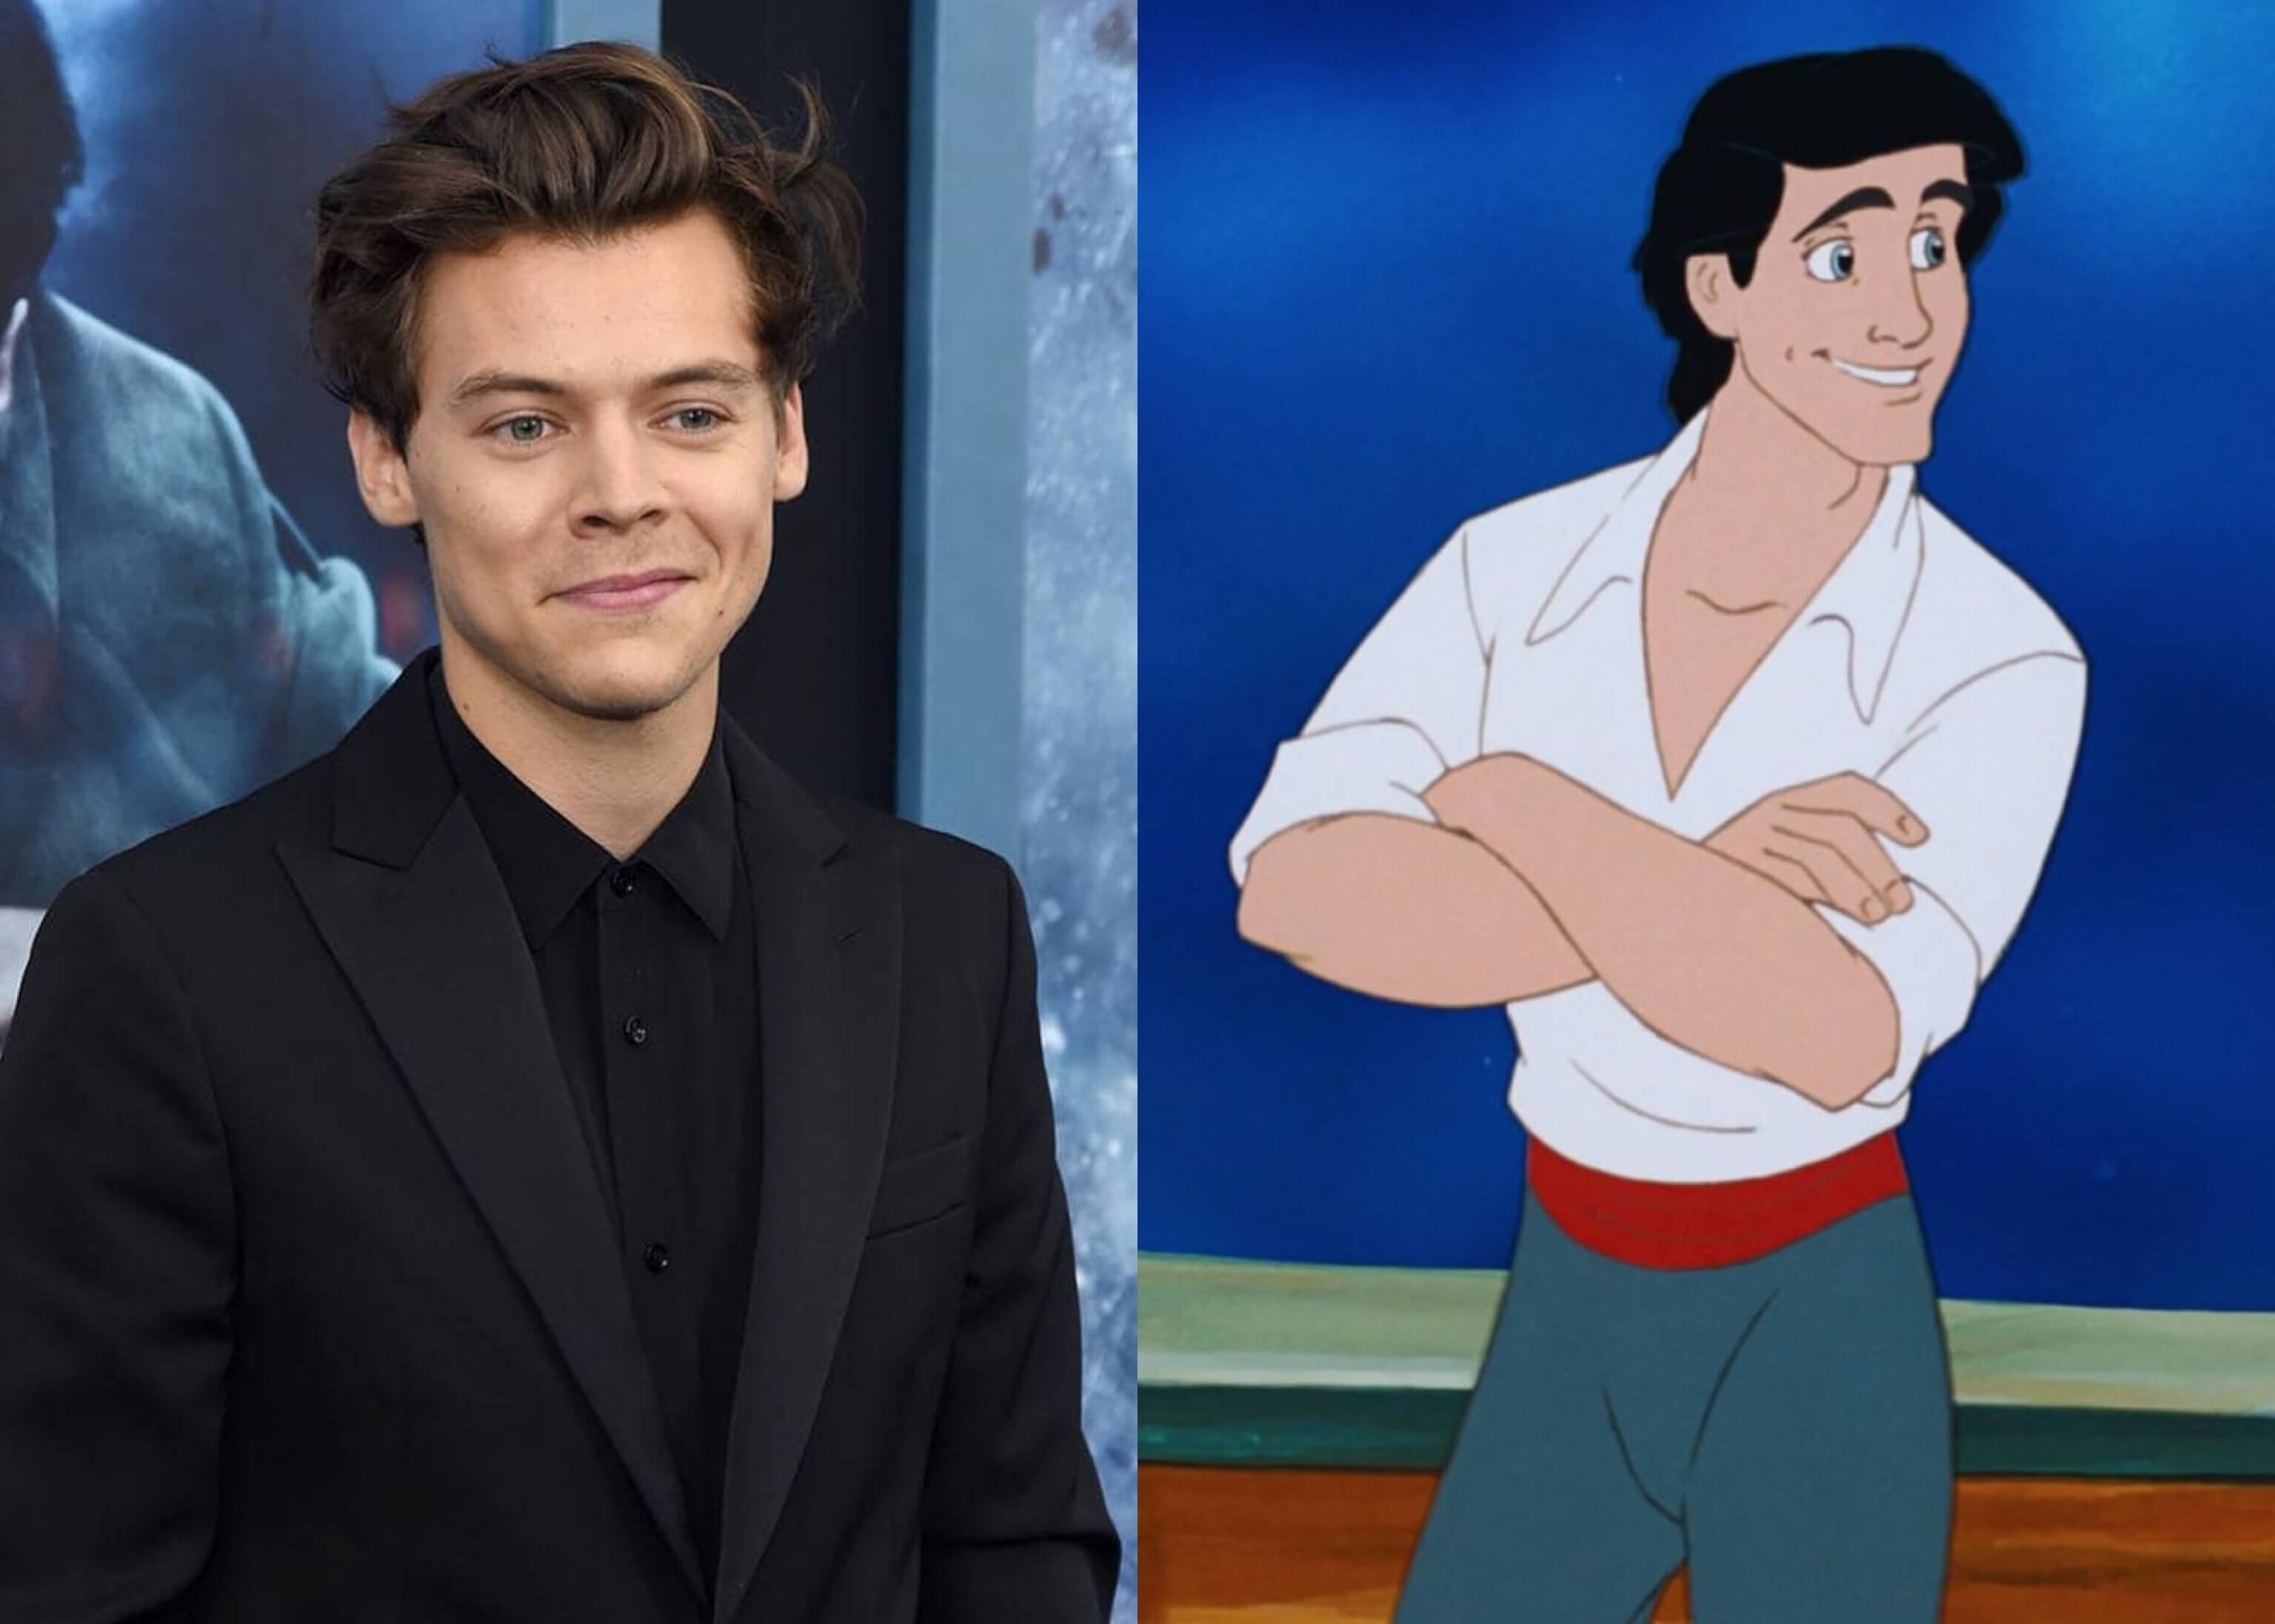 UPDATE: Harry Styles Has Officially Signed On To Play Prince Eric in ‘The Little Mermaid’